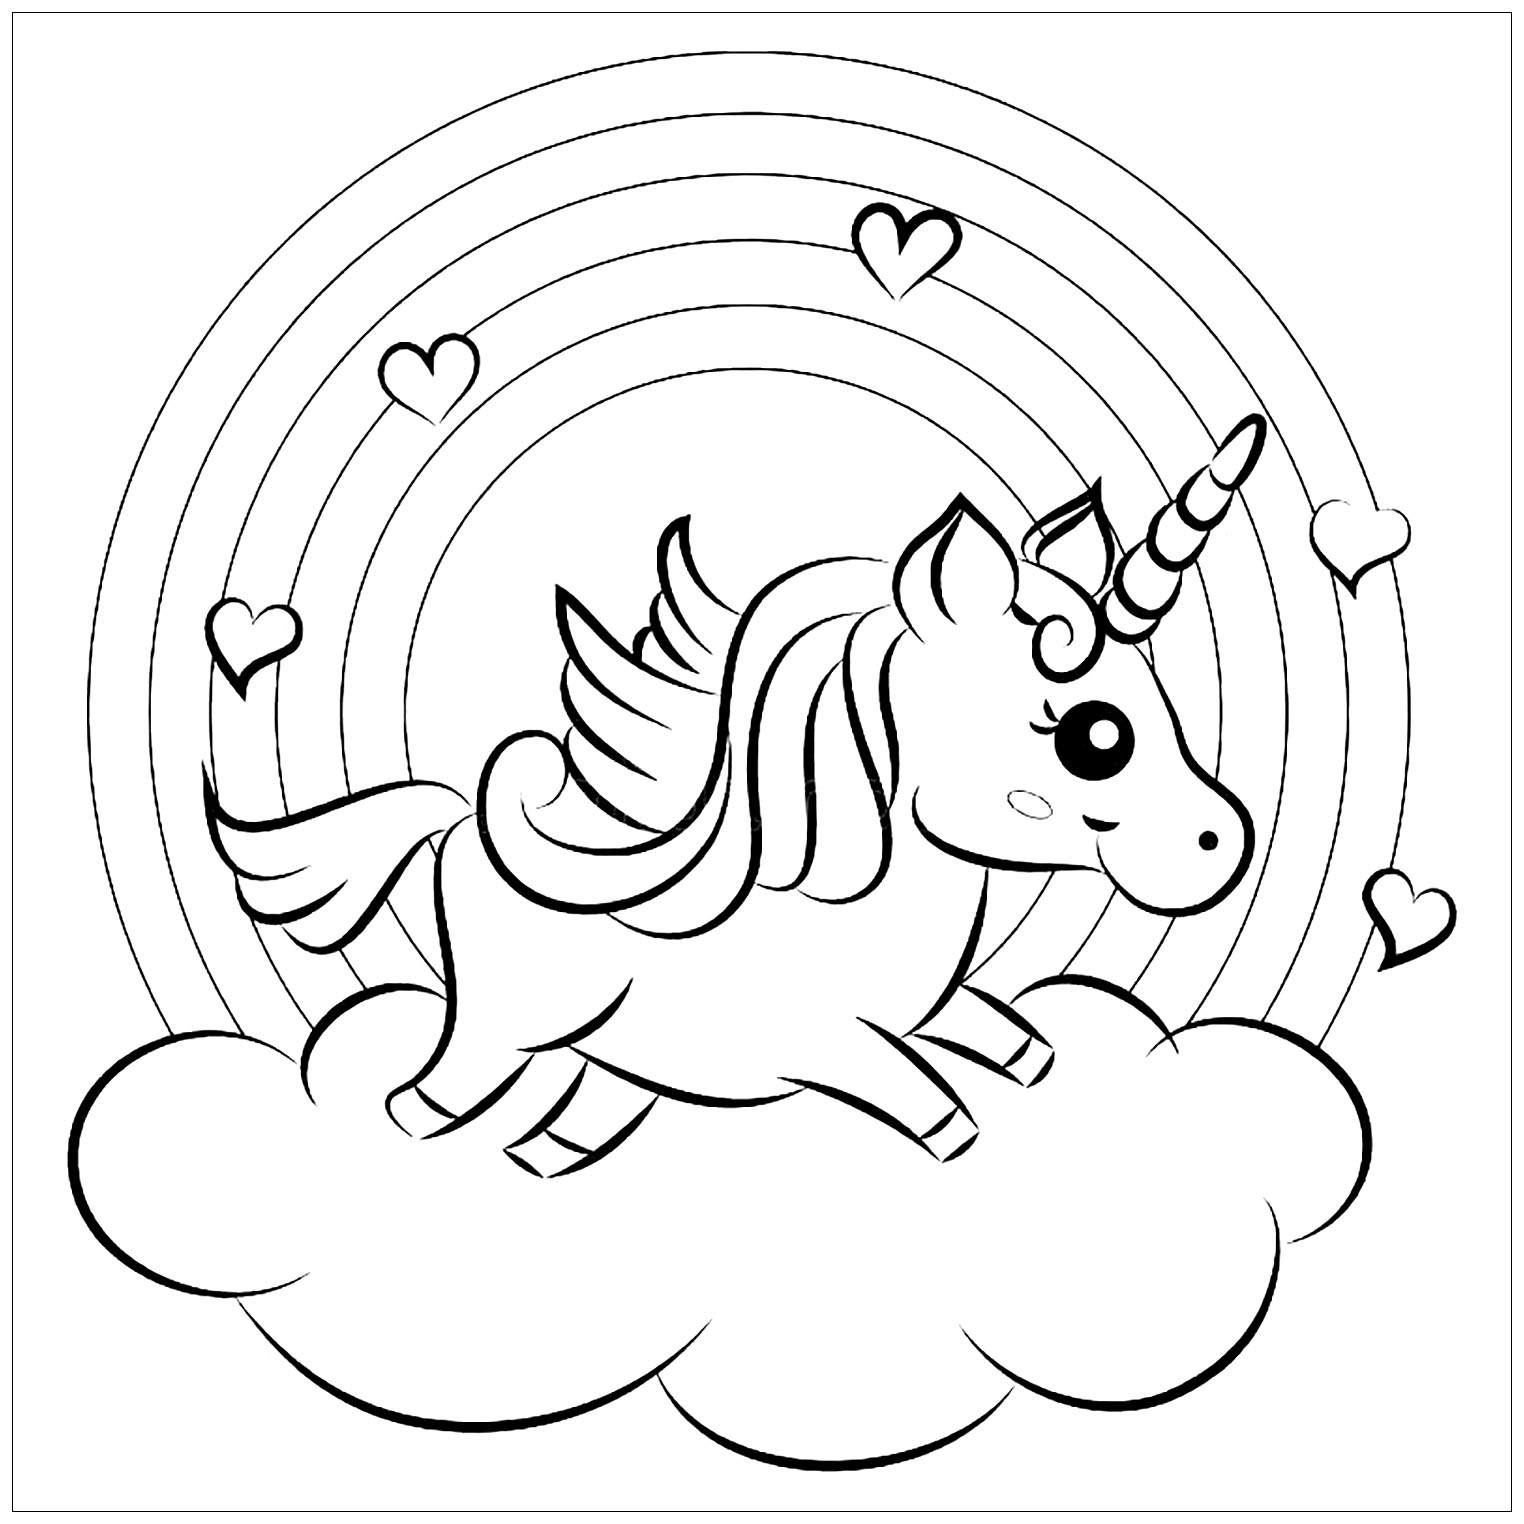 unicorn-coloring-pages-for-kids-special-needs-coloring-pages-learny